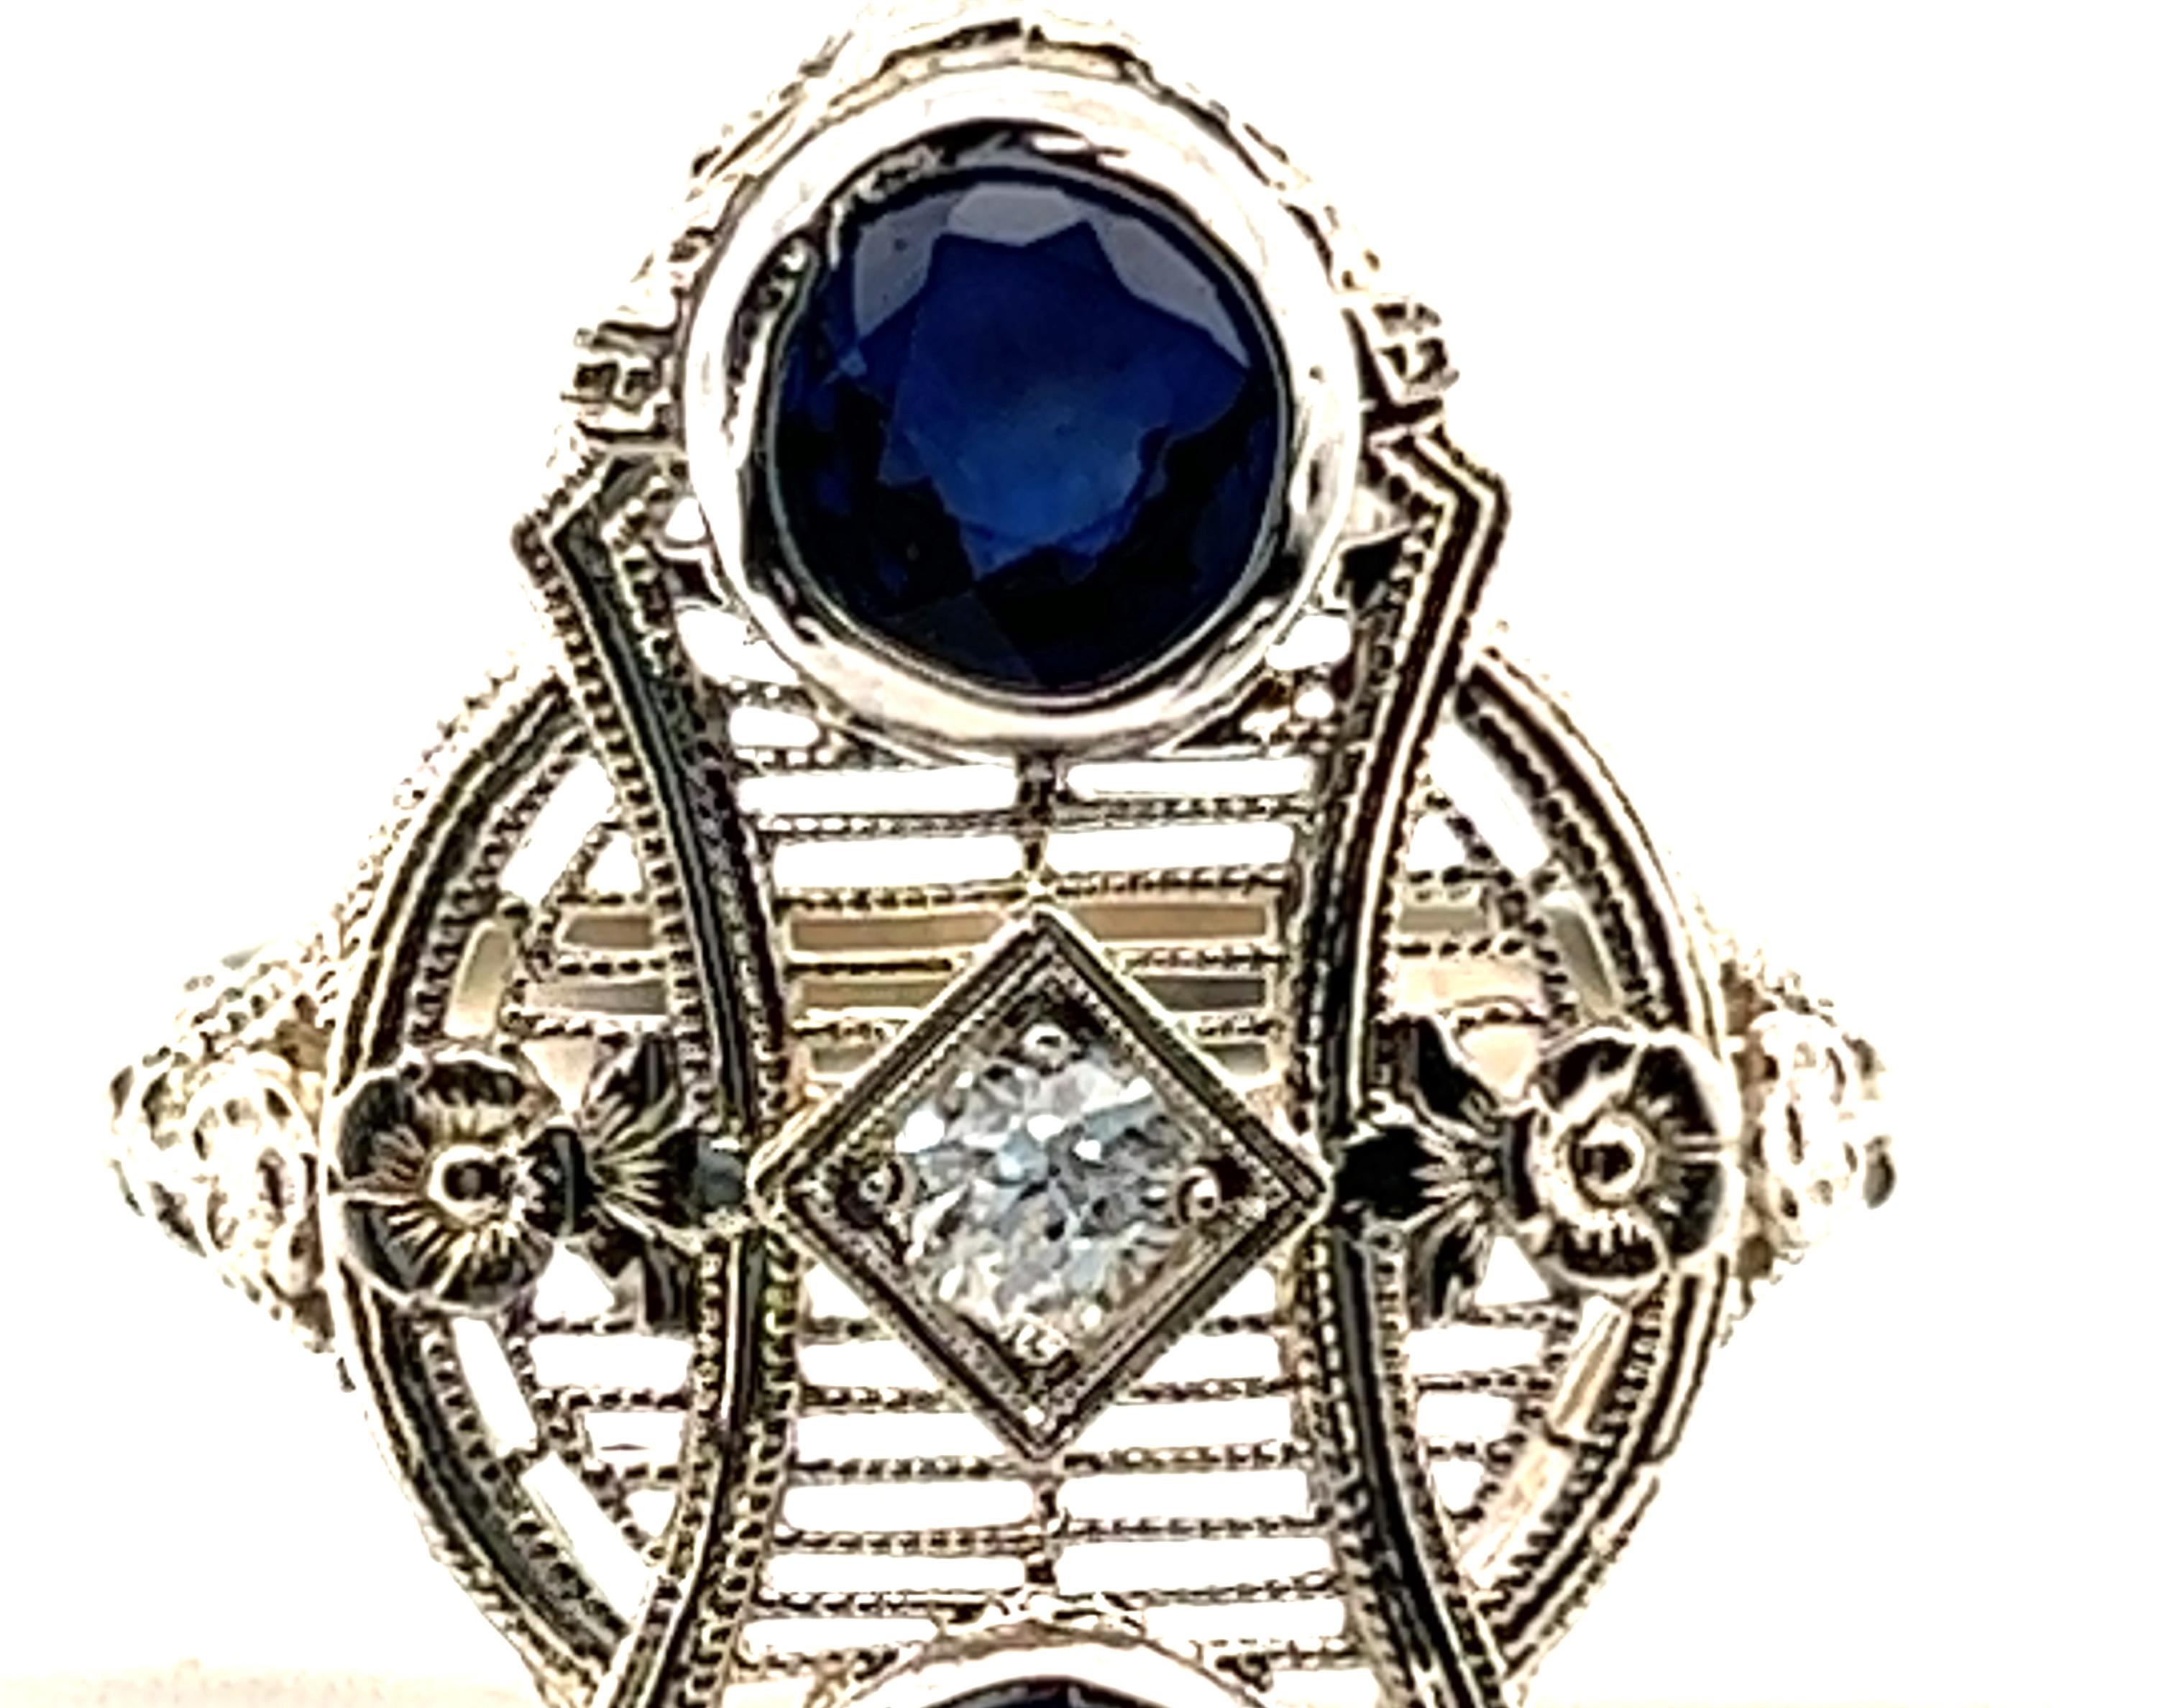 Genuine Original Antique from 1920s Sapphire Diamond Cocktail Ring 1.41ct Antique Art Deco Flowers 14k


Centering on a Natural Mined .10 Carat Old European Cut Diamond Center

Two Large (Over 1/2 Carat Each) Rich Royal Blue Bezel Set